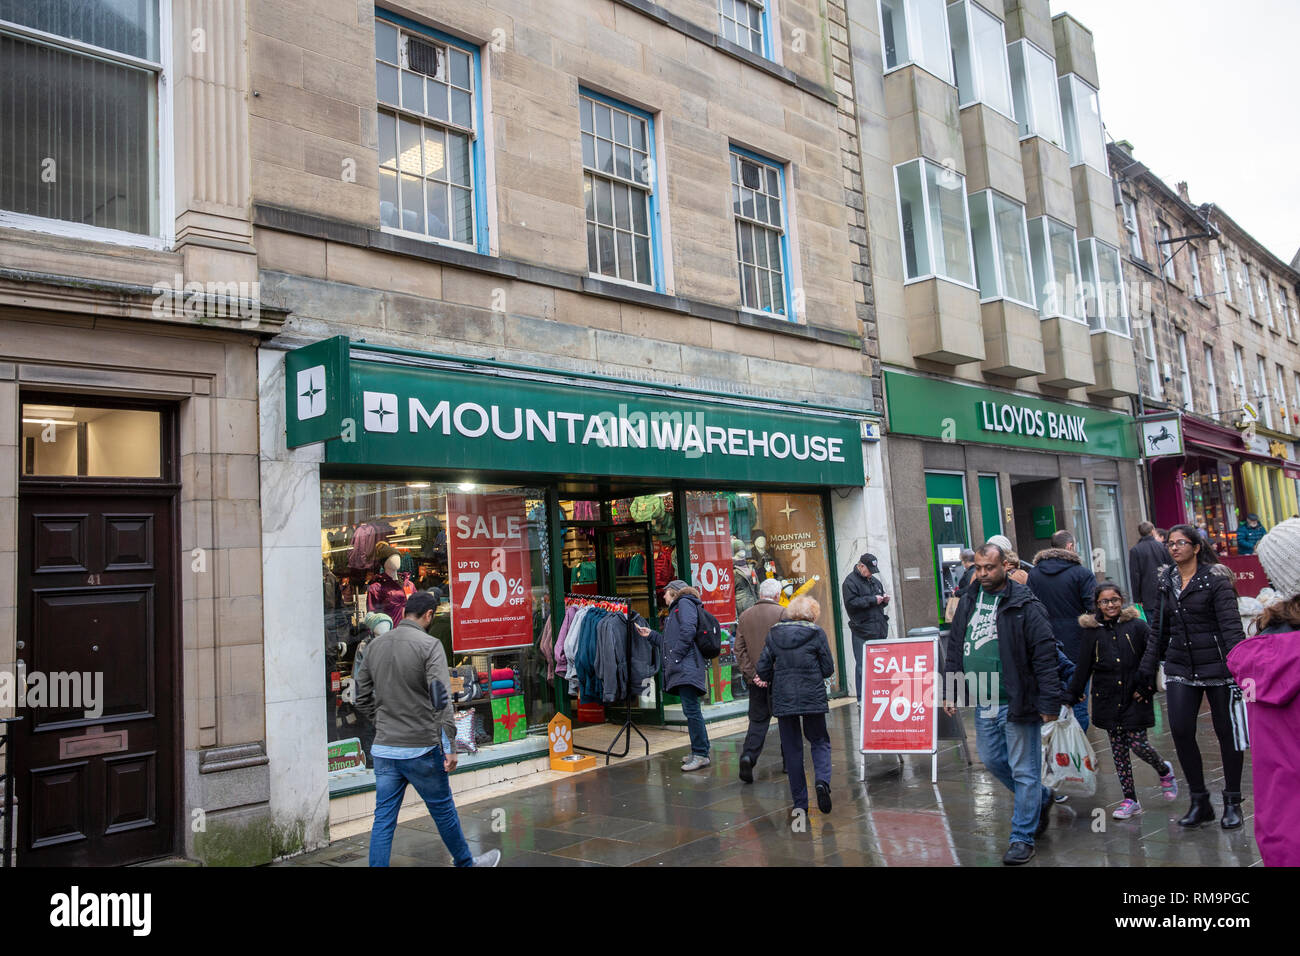 Mountain warehouse outdoor clothing store and branch of Lloyds bank in Lancaster city centre,Lancashire,England Stock Photo